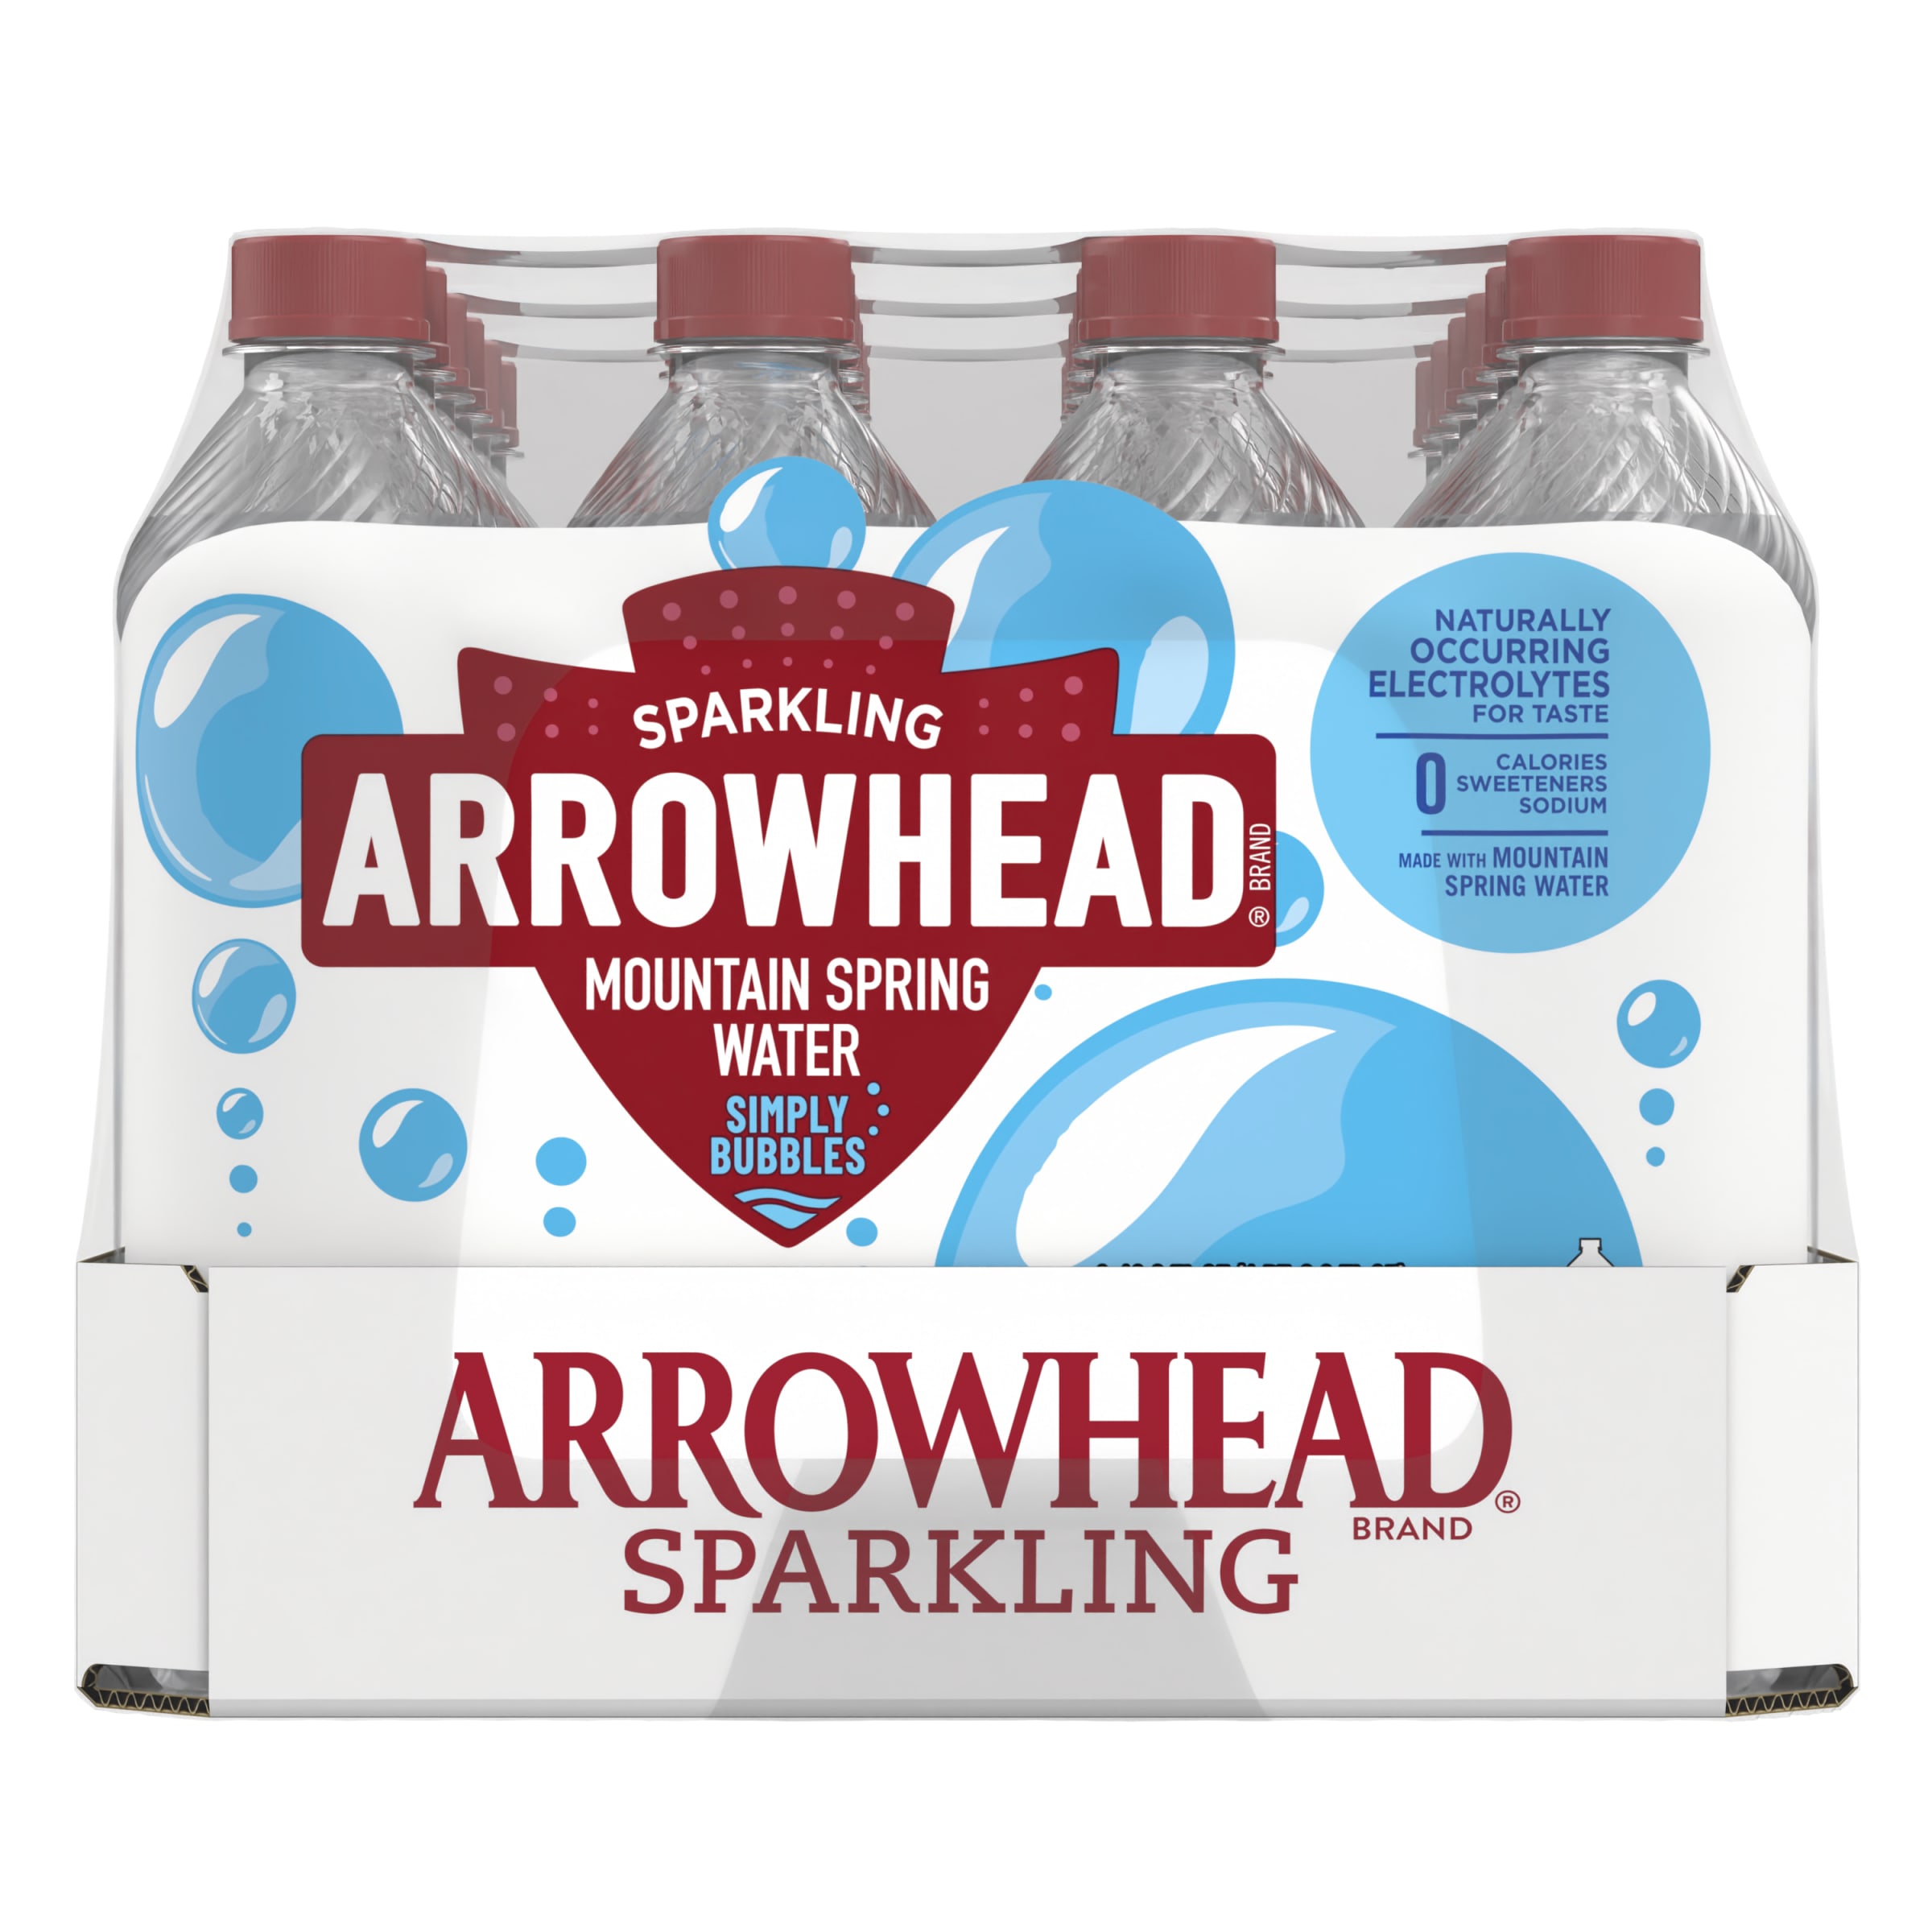 Arrowhead Sparkling Water, Simply Bubbles, 16.9 oz. Bottles (24 Count) - image 4 of 6